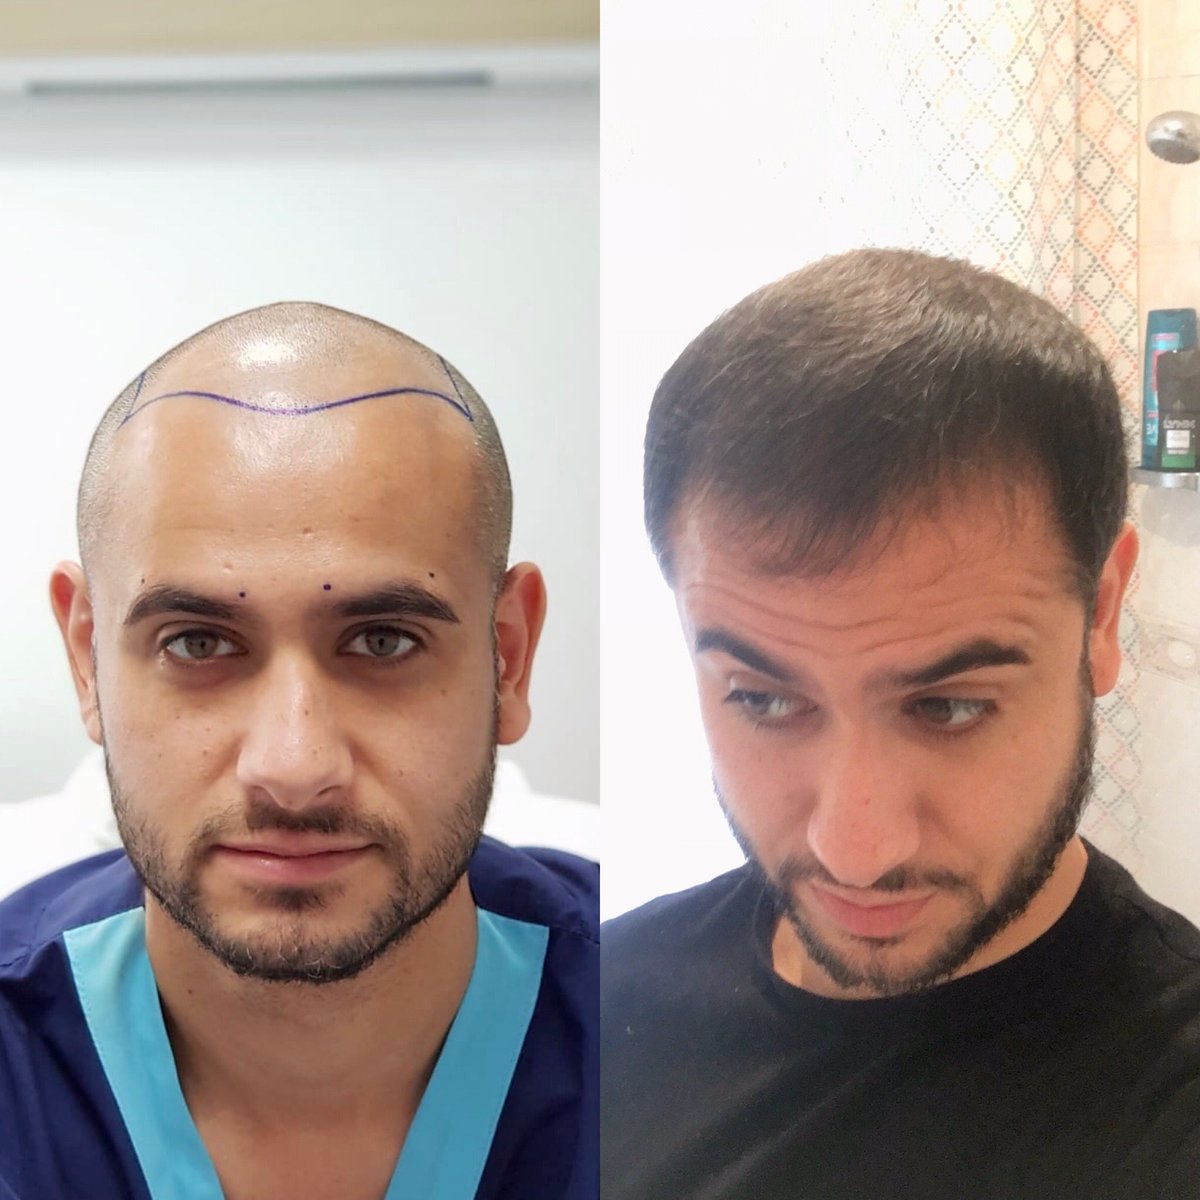 The Hair Transplant Specialist on Twitter: 